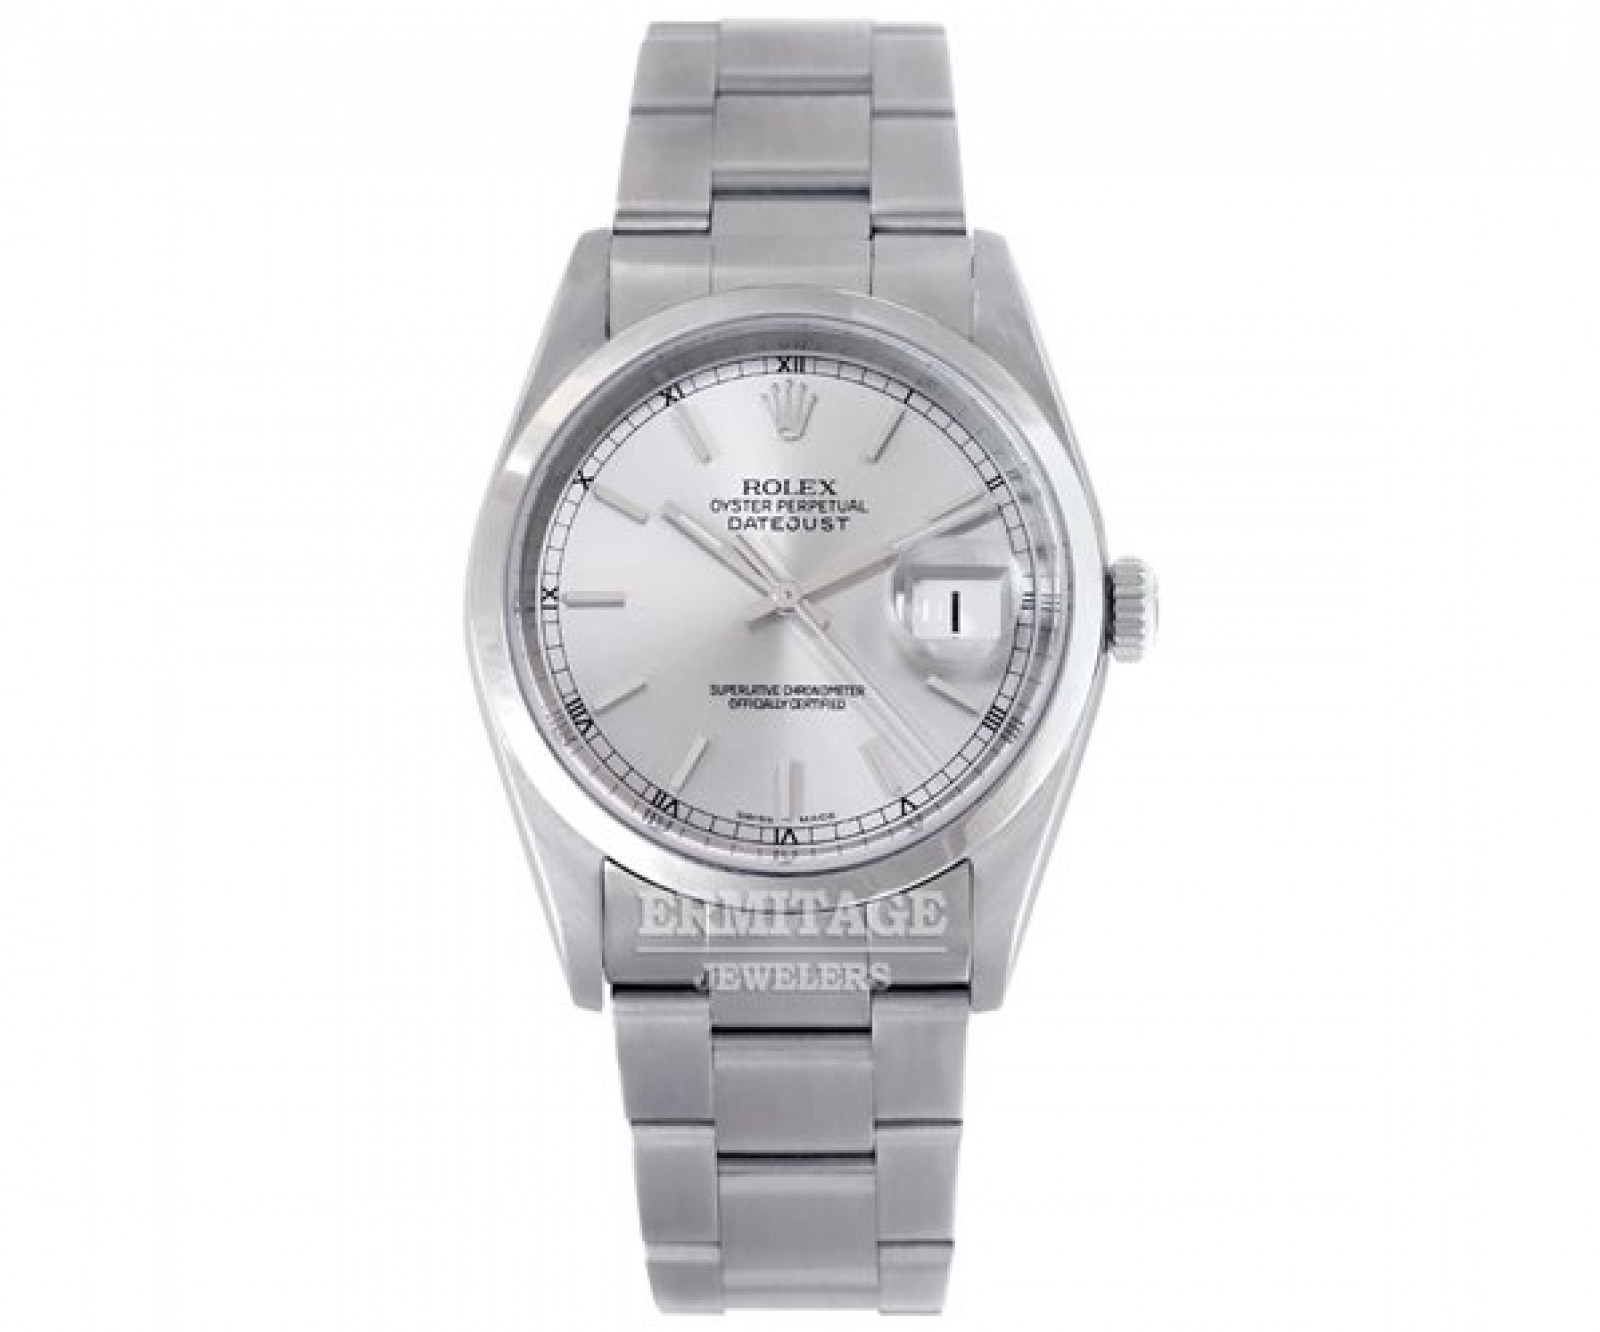 Sell Rolex Datejust 16200 Oyster